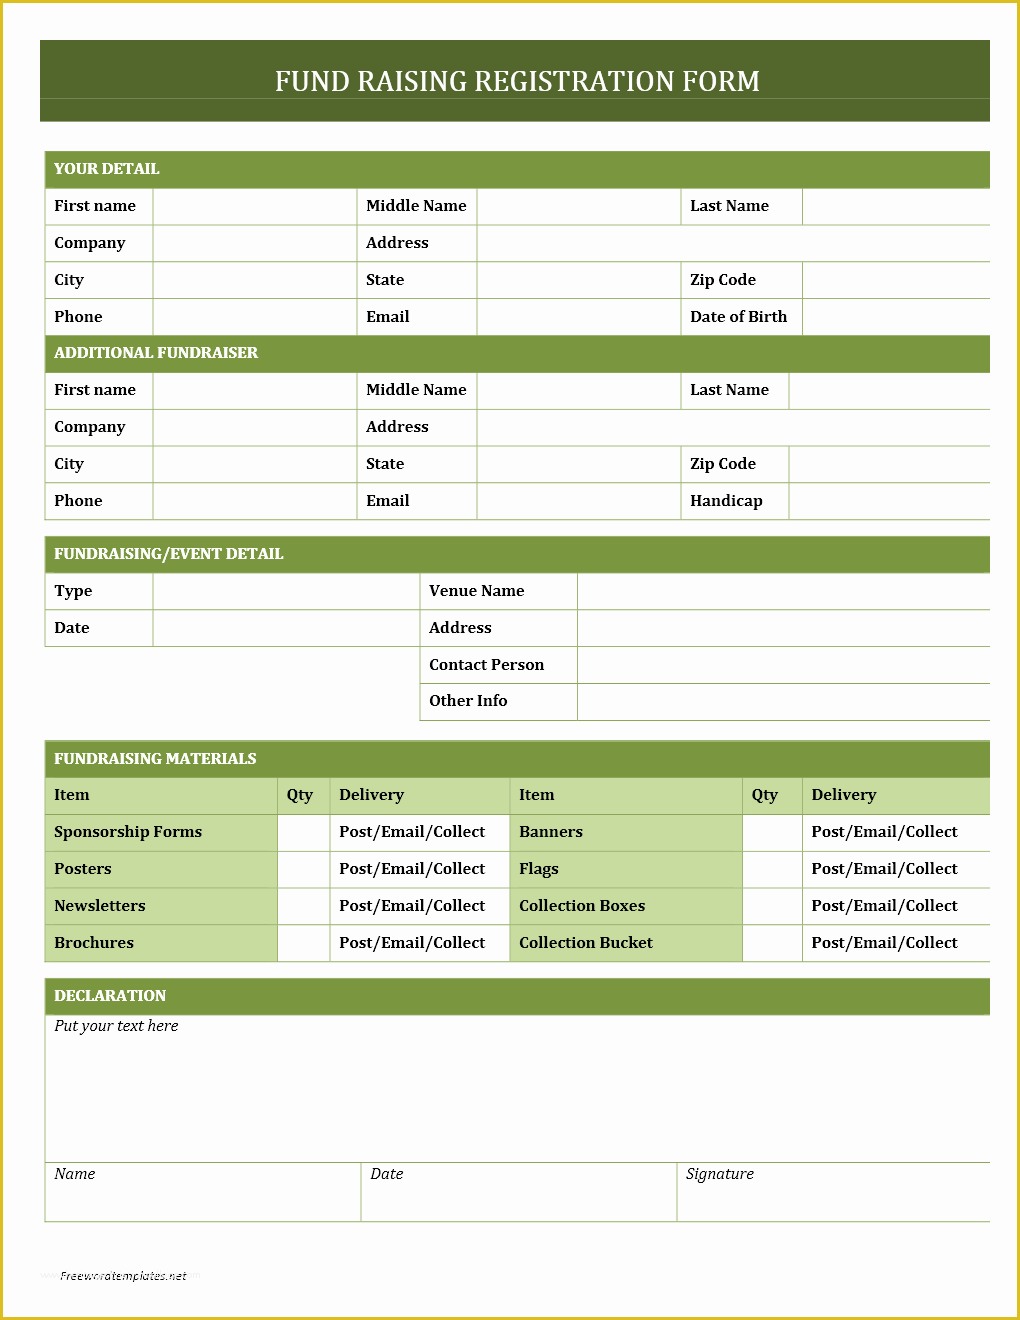 Free HTML form Templates Of Fundraising Registration form